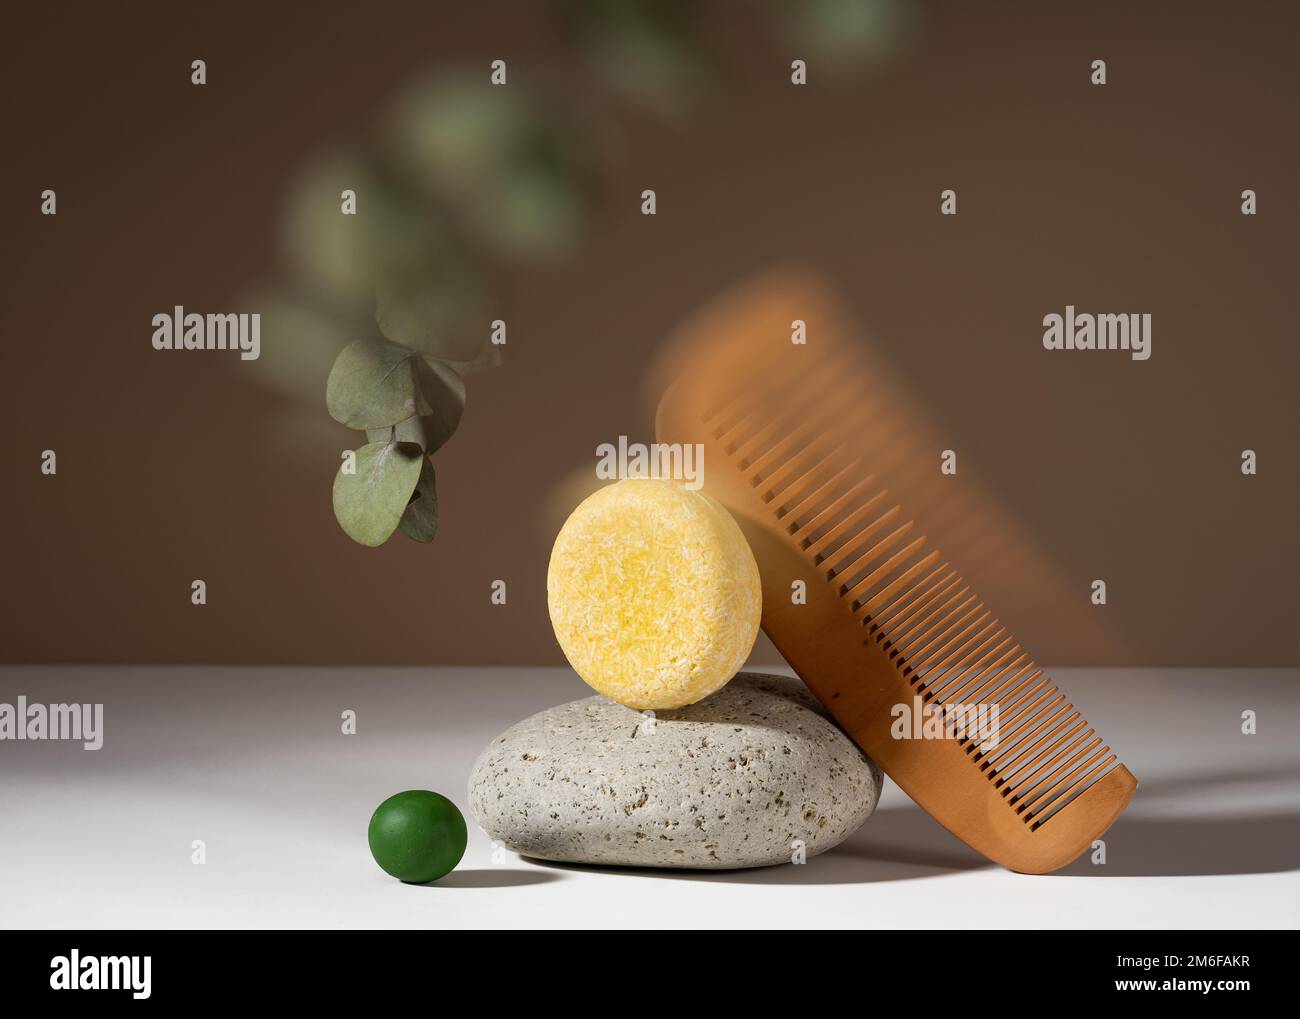 Modern still life composition of a solid shampoo bar with kaleidoscopic glitch effect. Shampoo bar and a wooden comb balancing on a brown background. Stock Photo